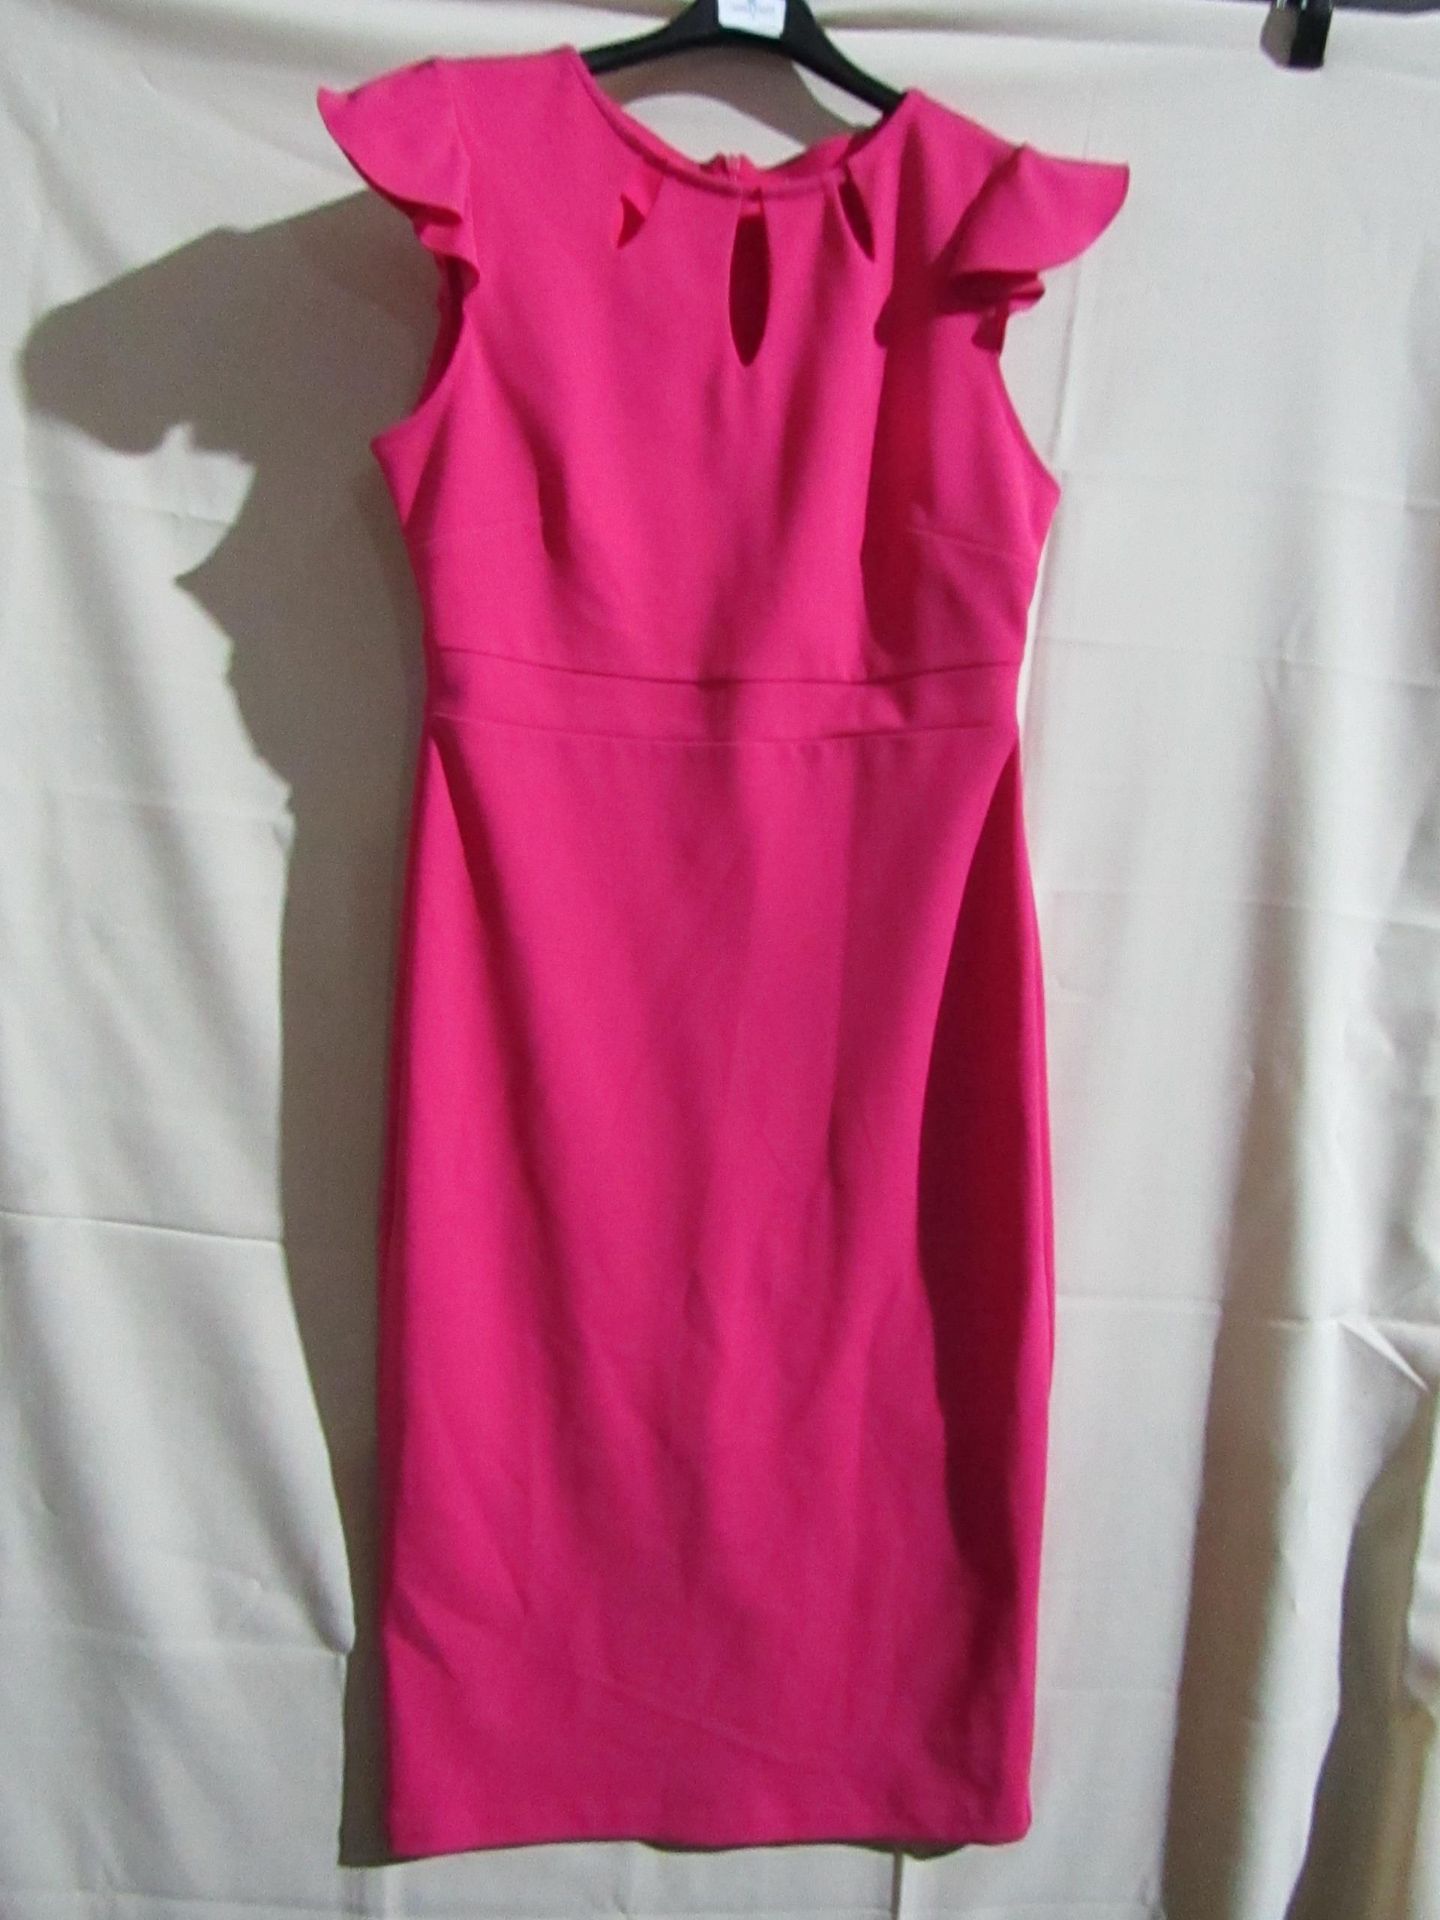 Unbranded Pink Dress Size Approx 12 No Label As It Has Been Cut Out